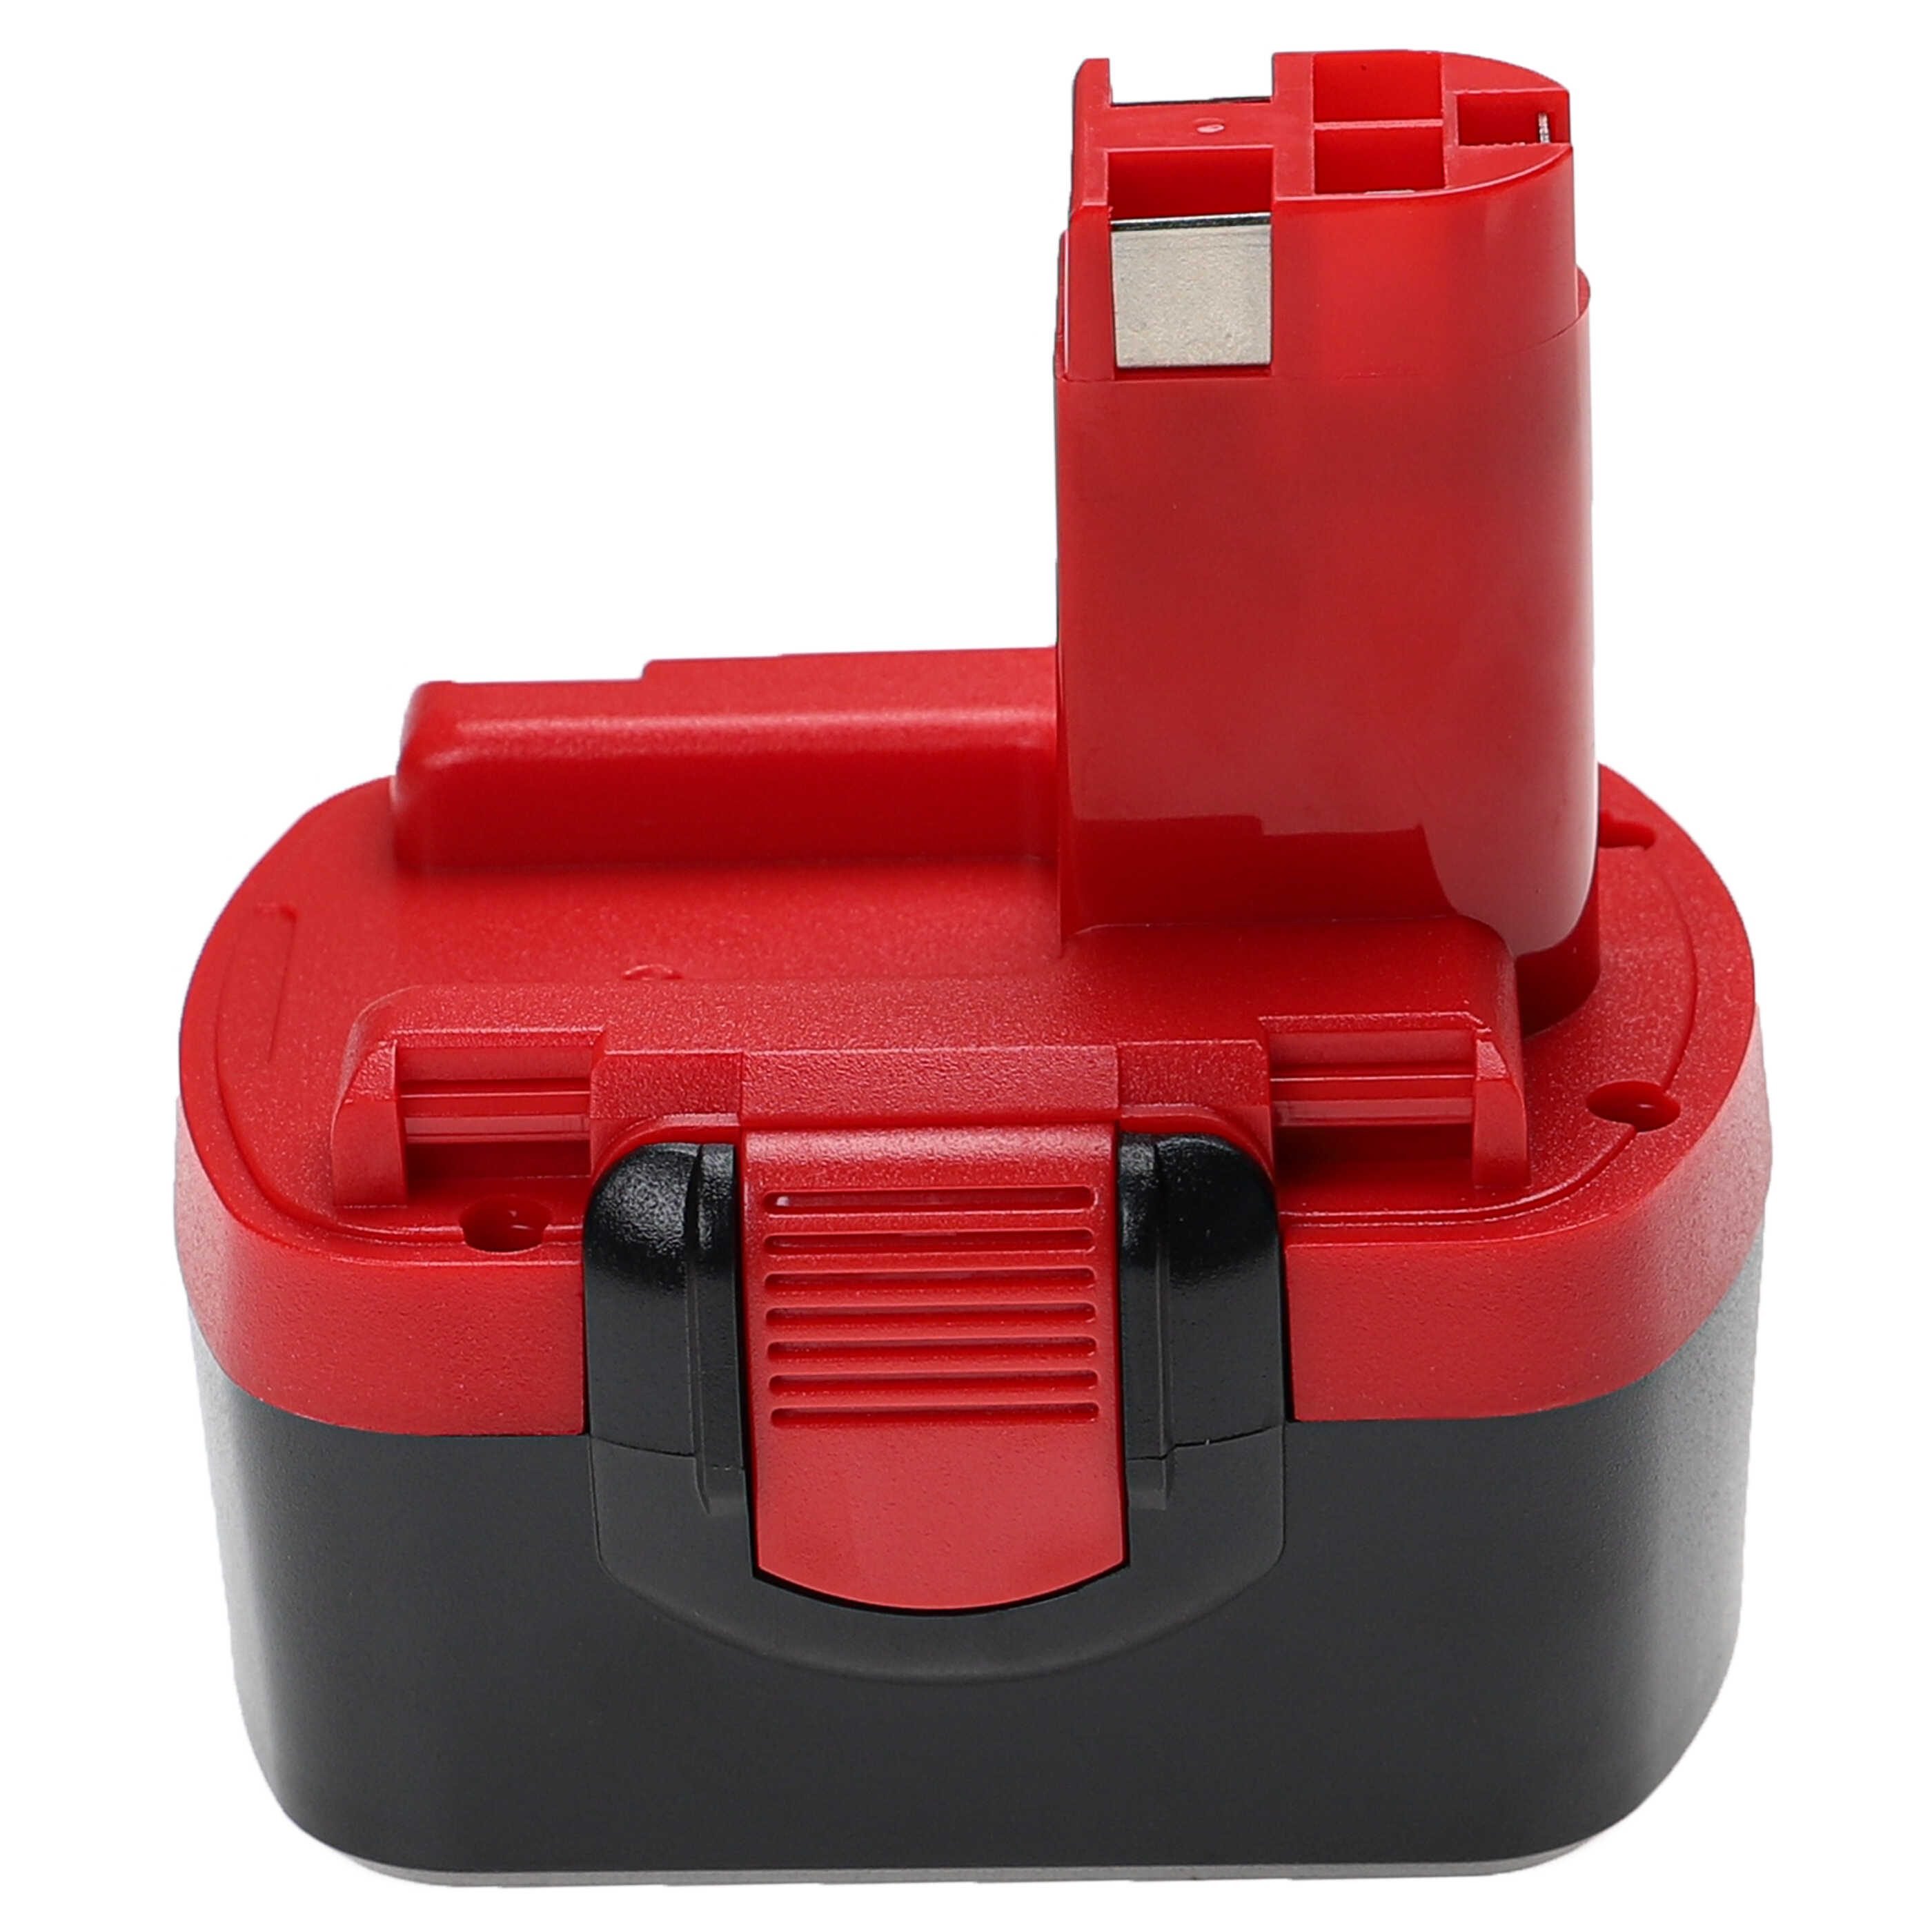 Electric Power Tool Battery (2x Unit) Replaces Bosch 2 607 335 263, 1617S0004W - 2000 mAh, 14.4 V, NiMH